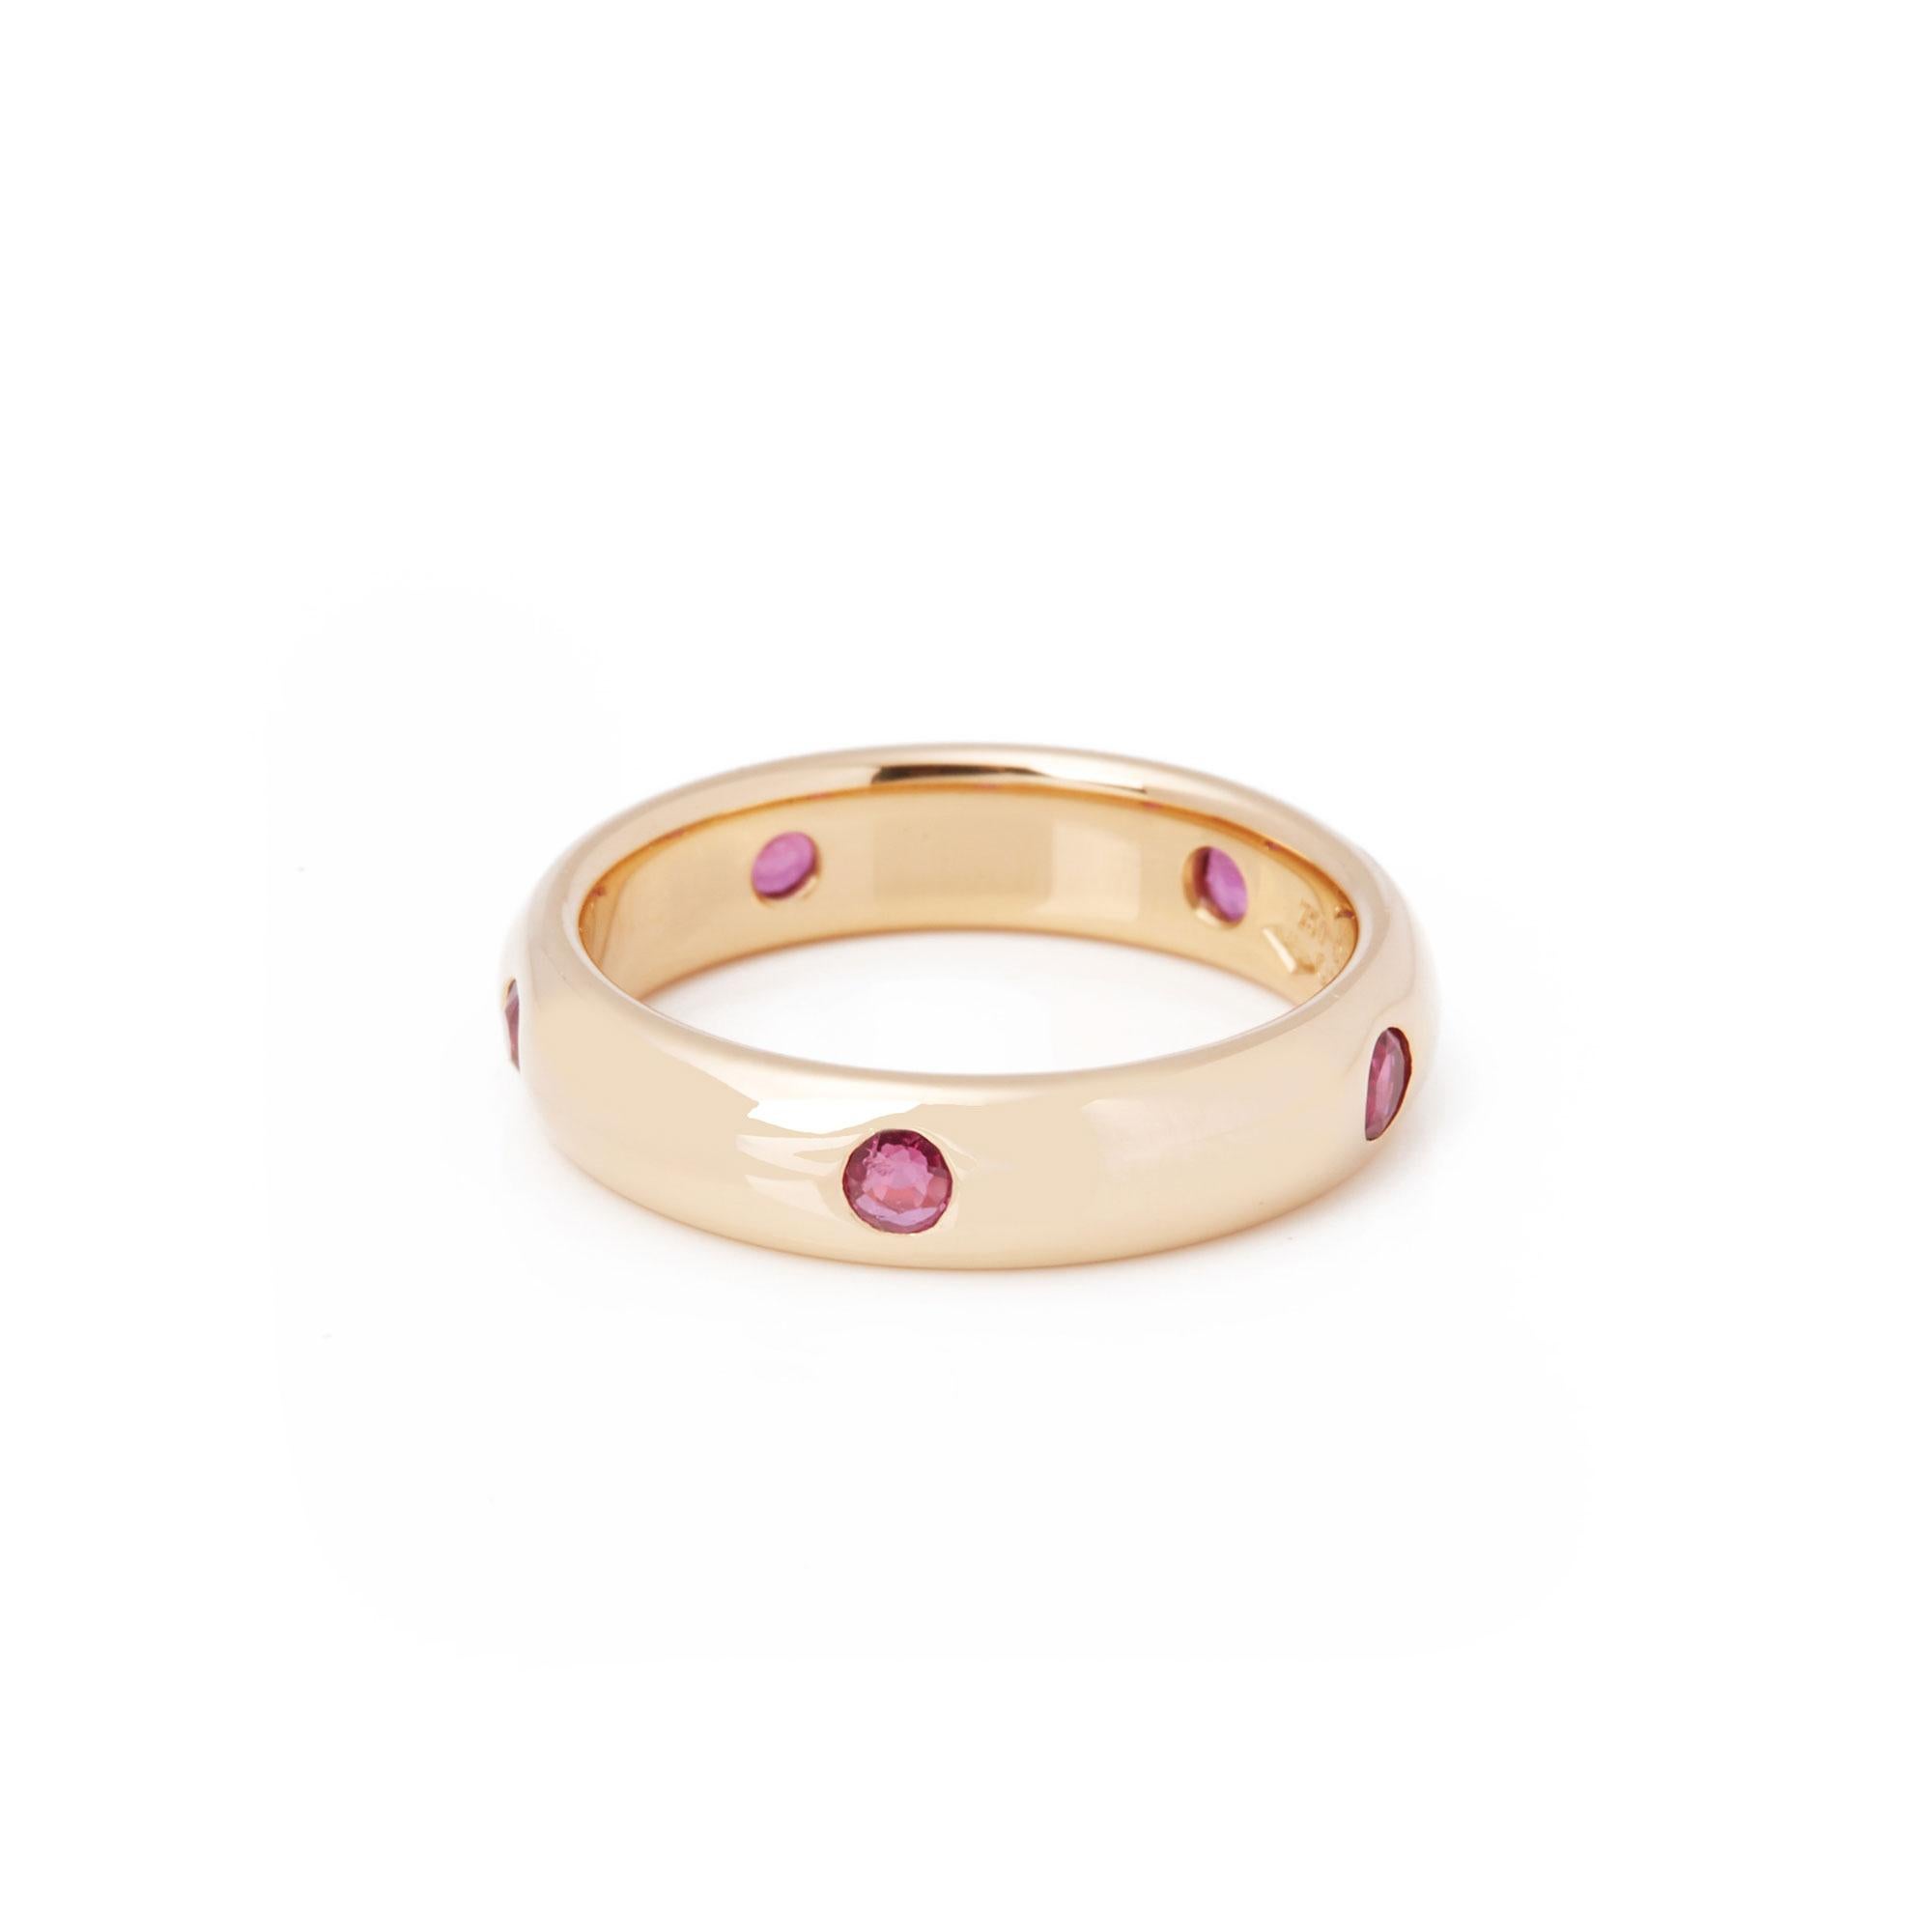 This ring by Cartier is from their Stella collection and features five swiss set rubies mounted in an 18ct yellow gold band ring. UK ring size H. EU ring size 46. US ring size 3 3/4. Comes with Xupes presentation box. Our Xupes reference is COMJ473